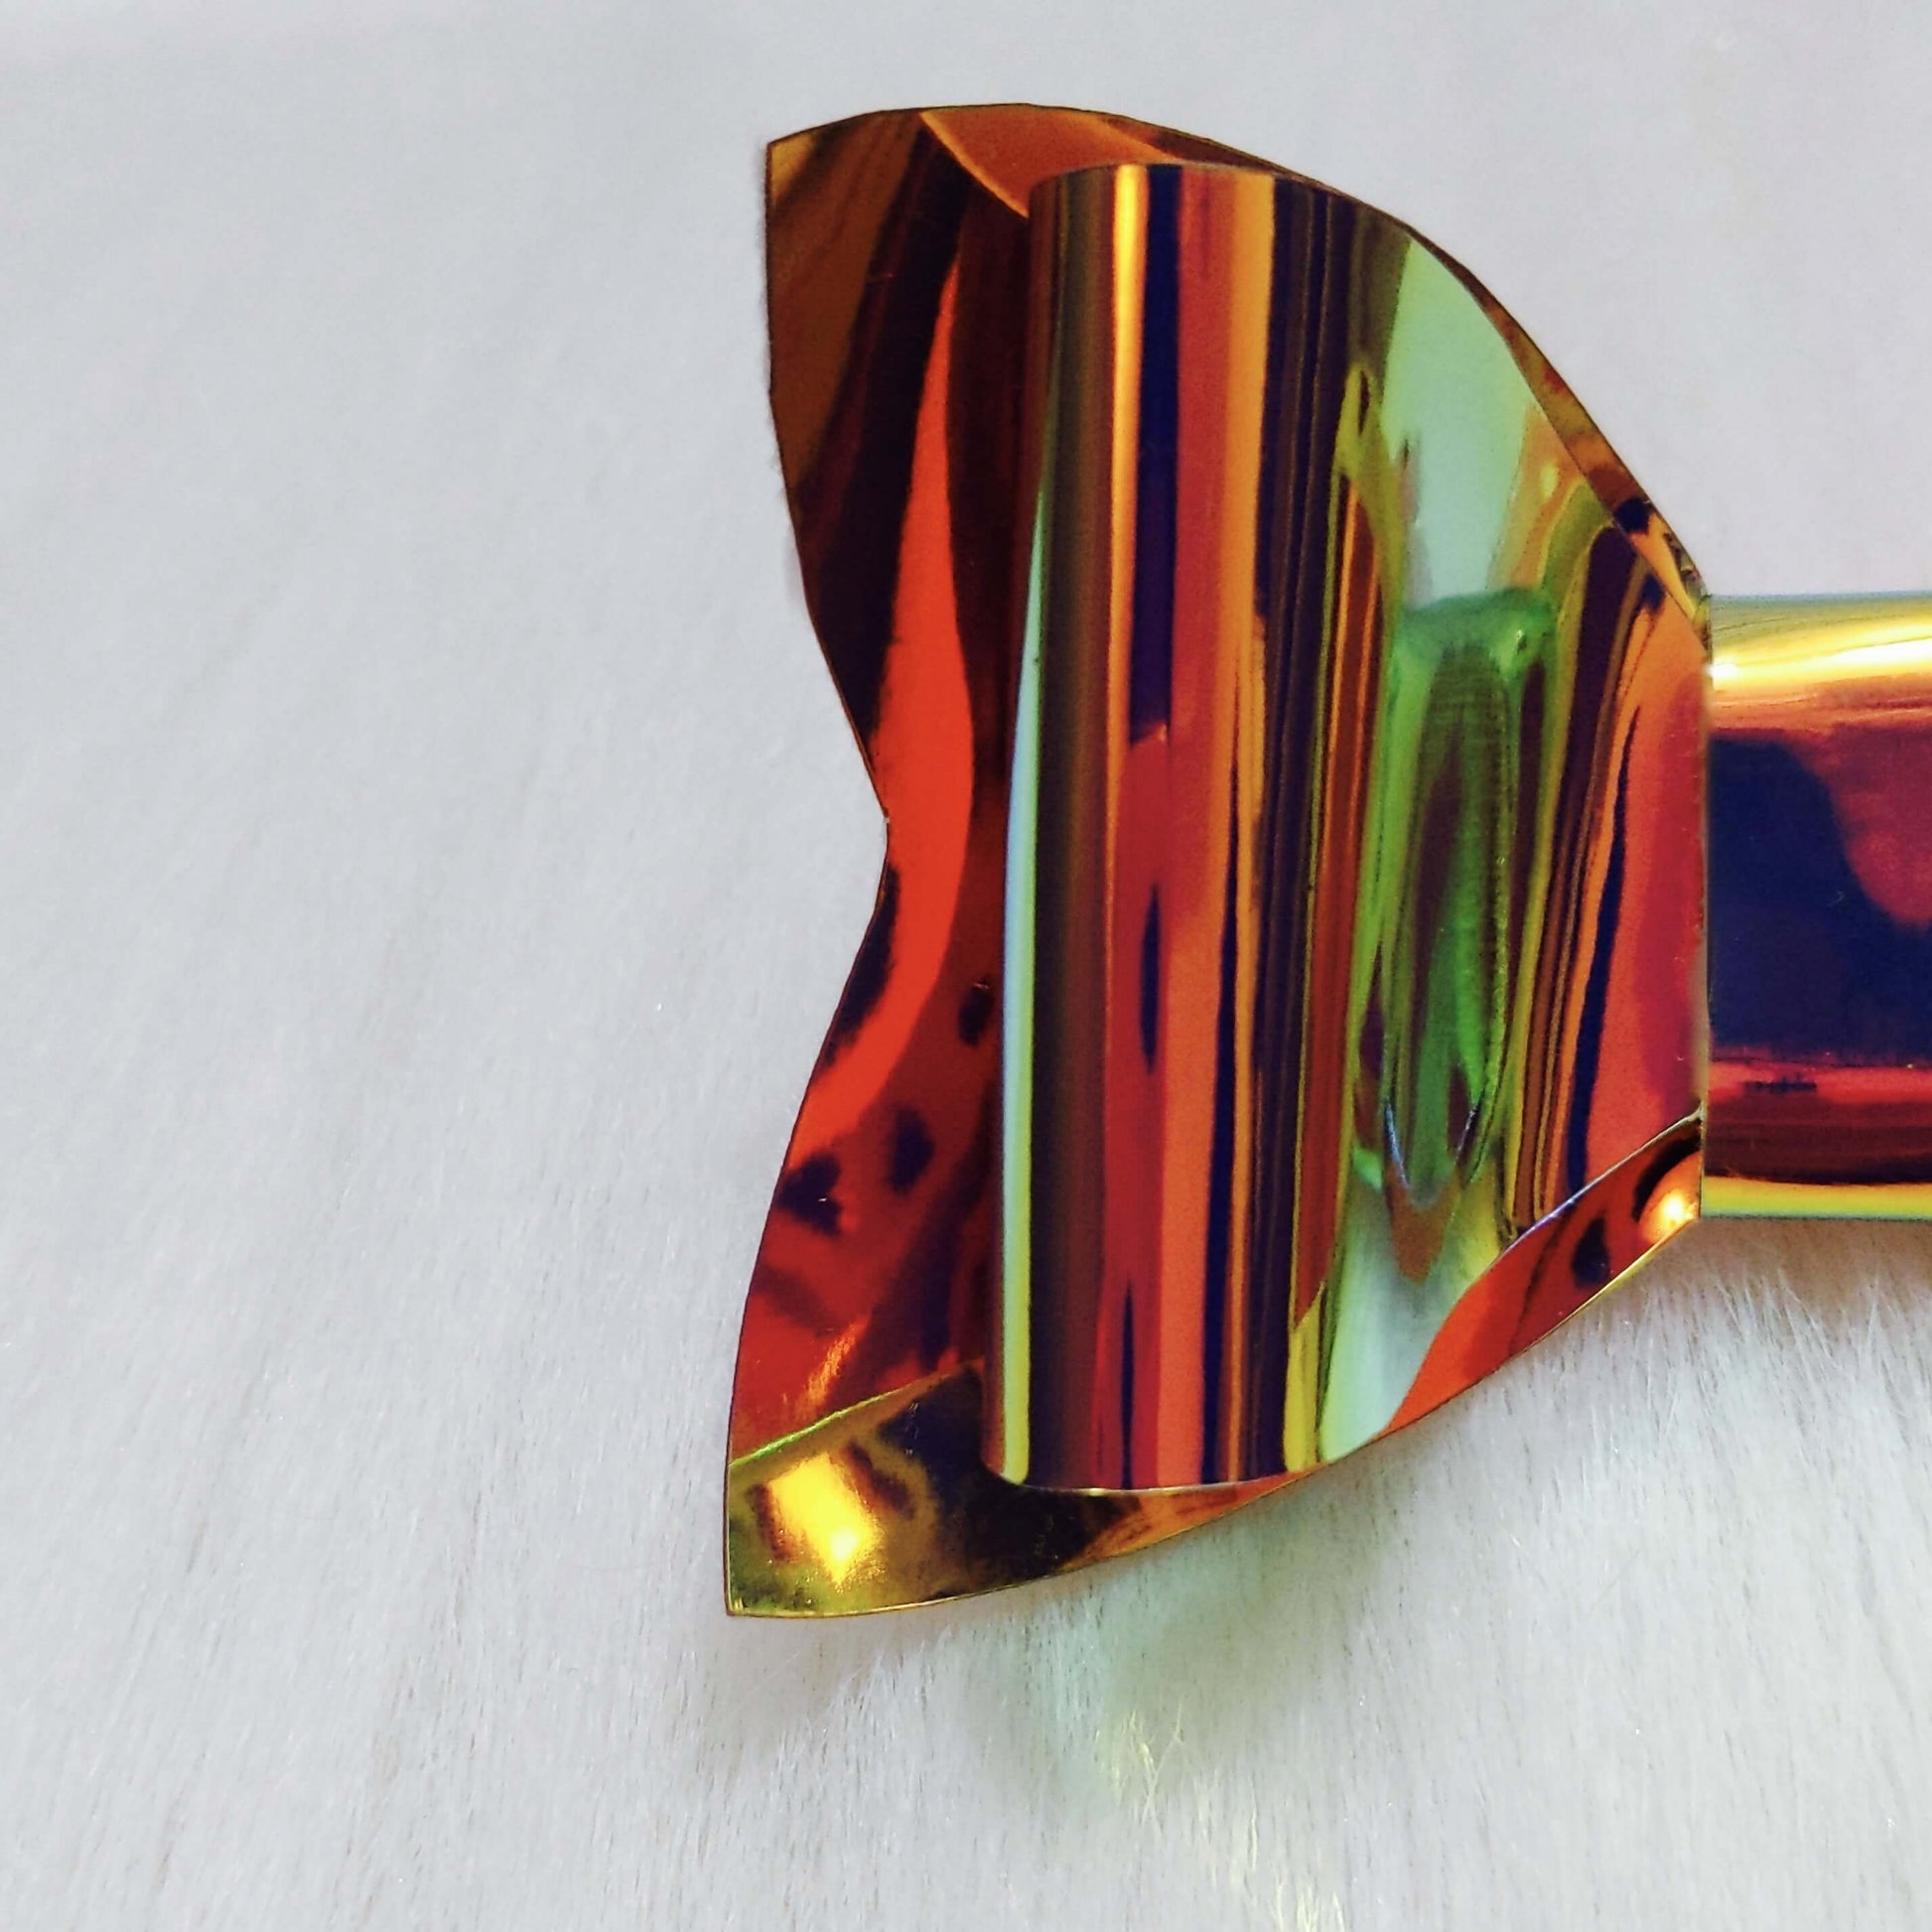 Holographic Gold Bow Hair Clip | Designer Hair Accessories for Kids and Girls